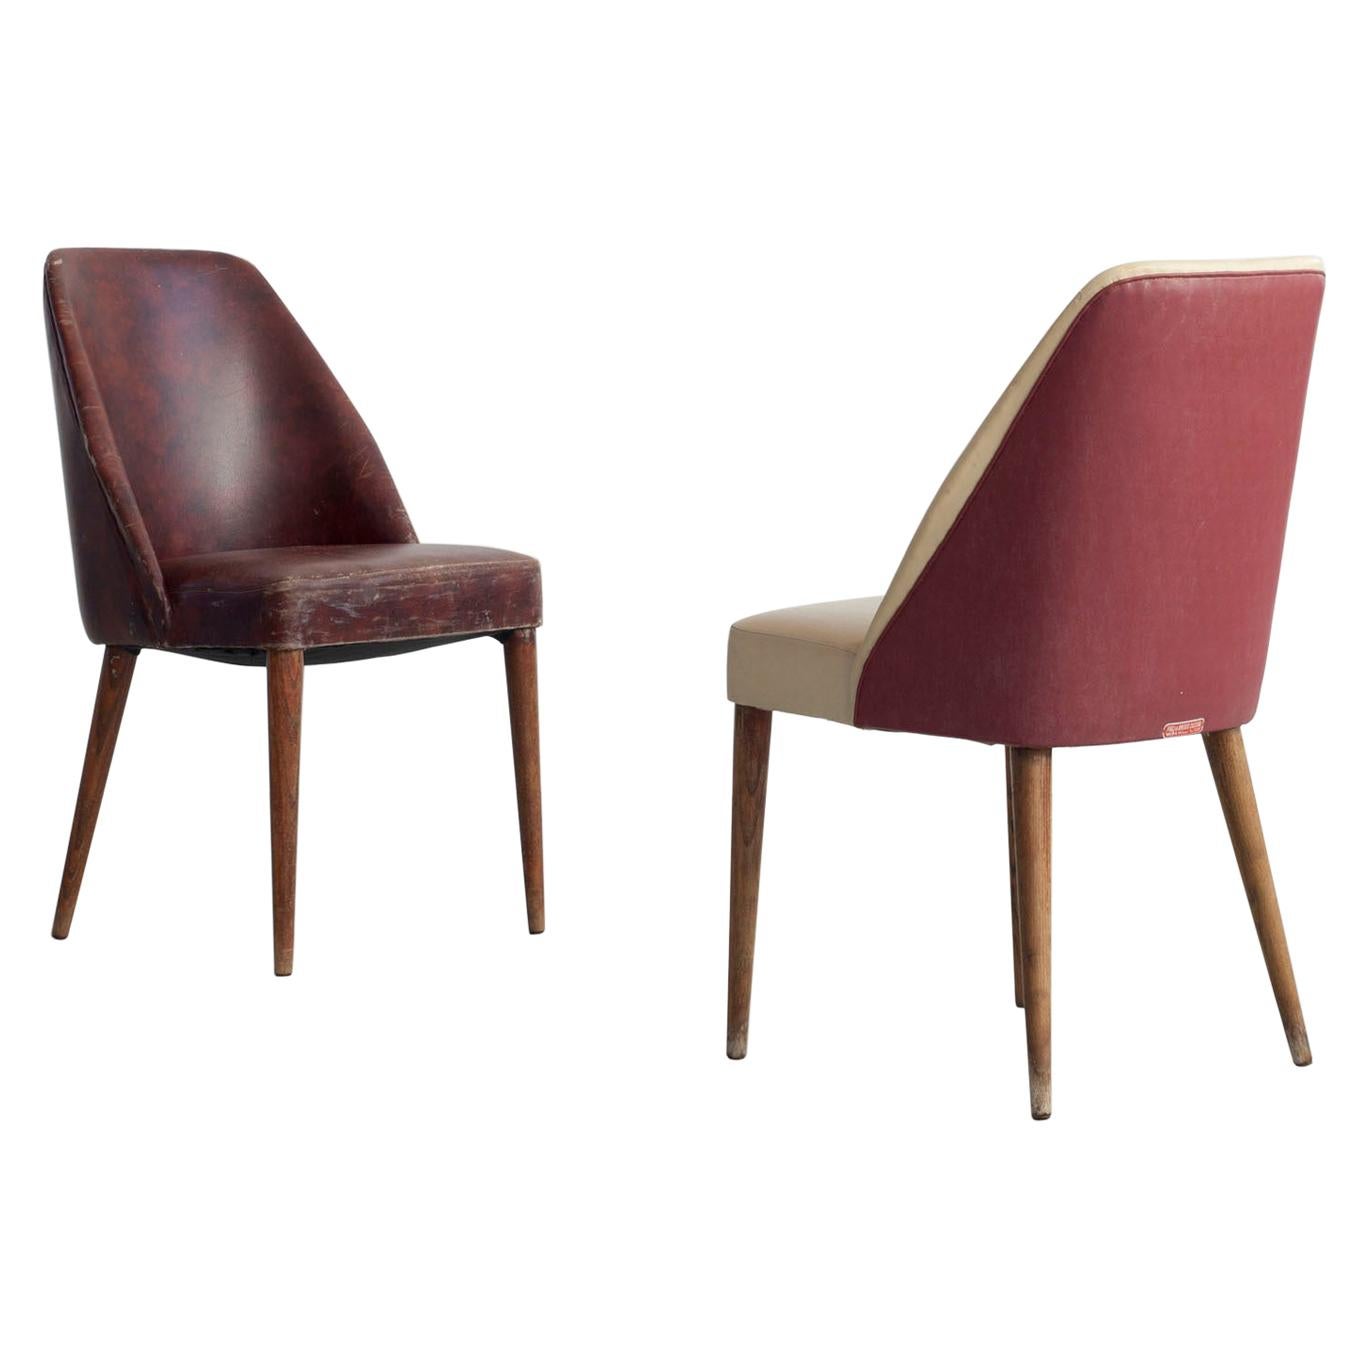 Pair of Chairs, Design and Manufacturing by Figli di Amedeo Cassina